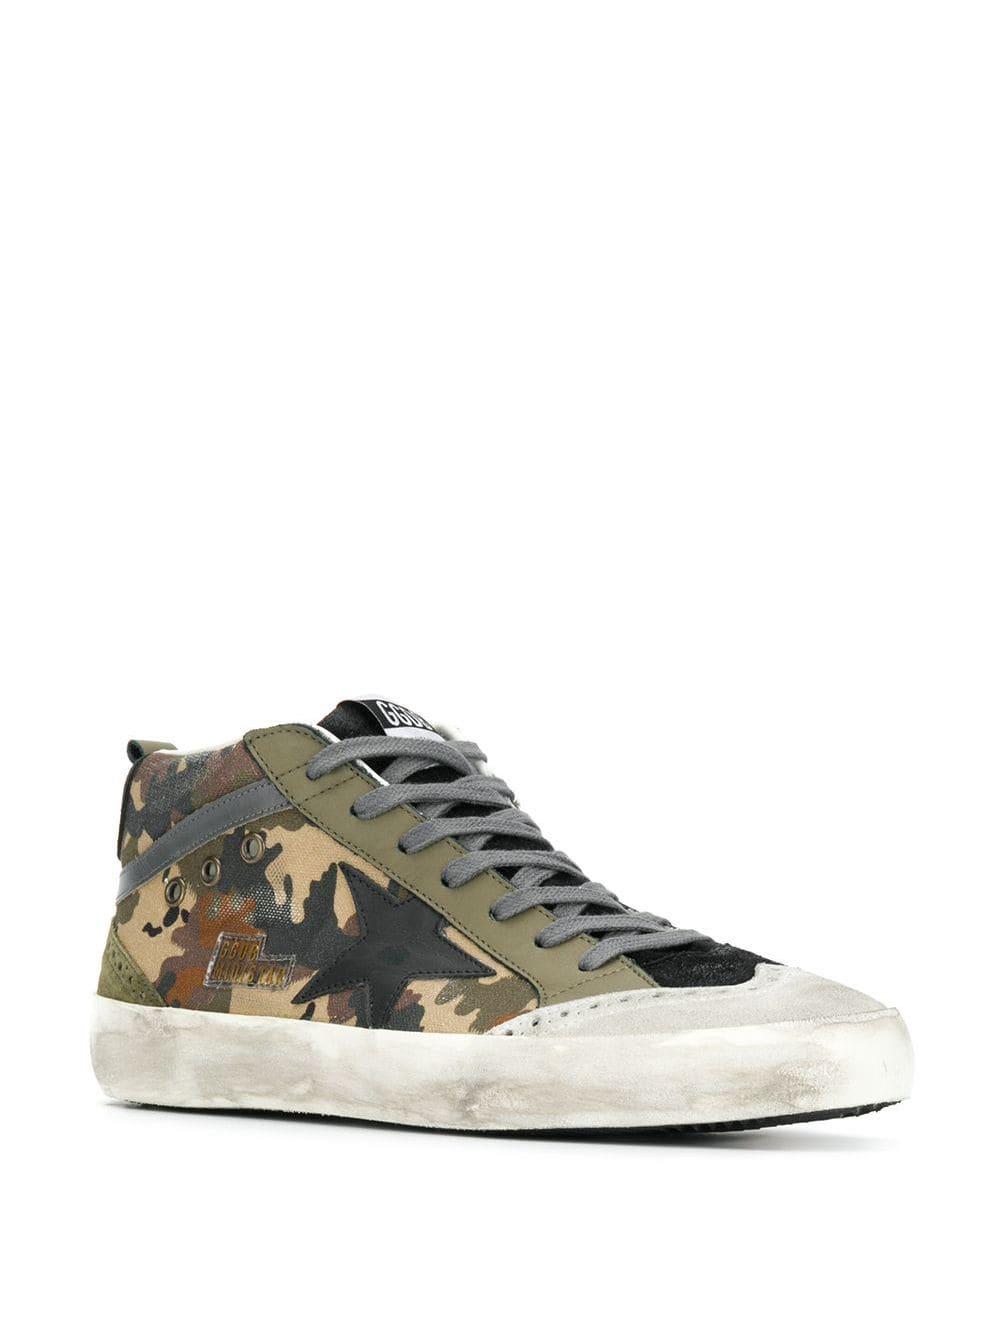 Golden Goose Goose Mid-star Camouflage Sneakers in Green for Men - Lyst